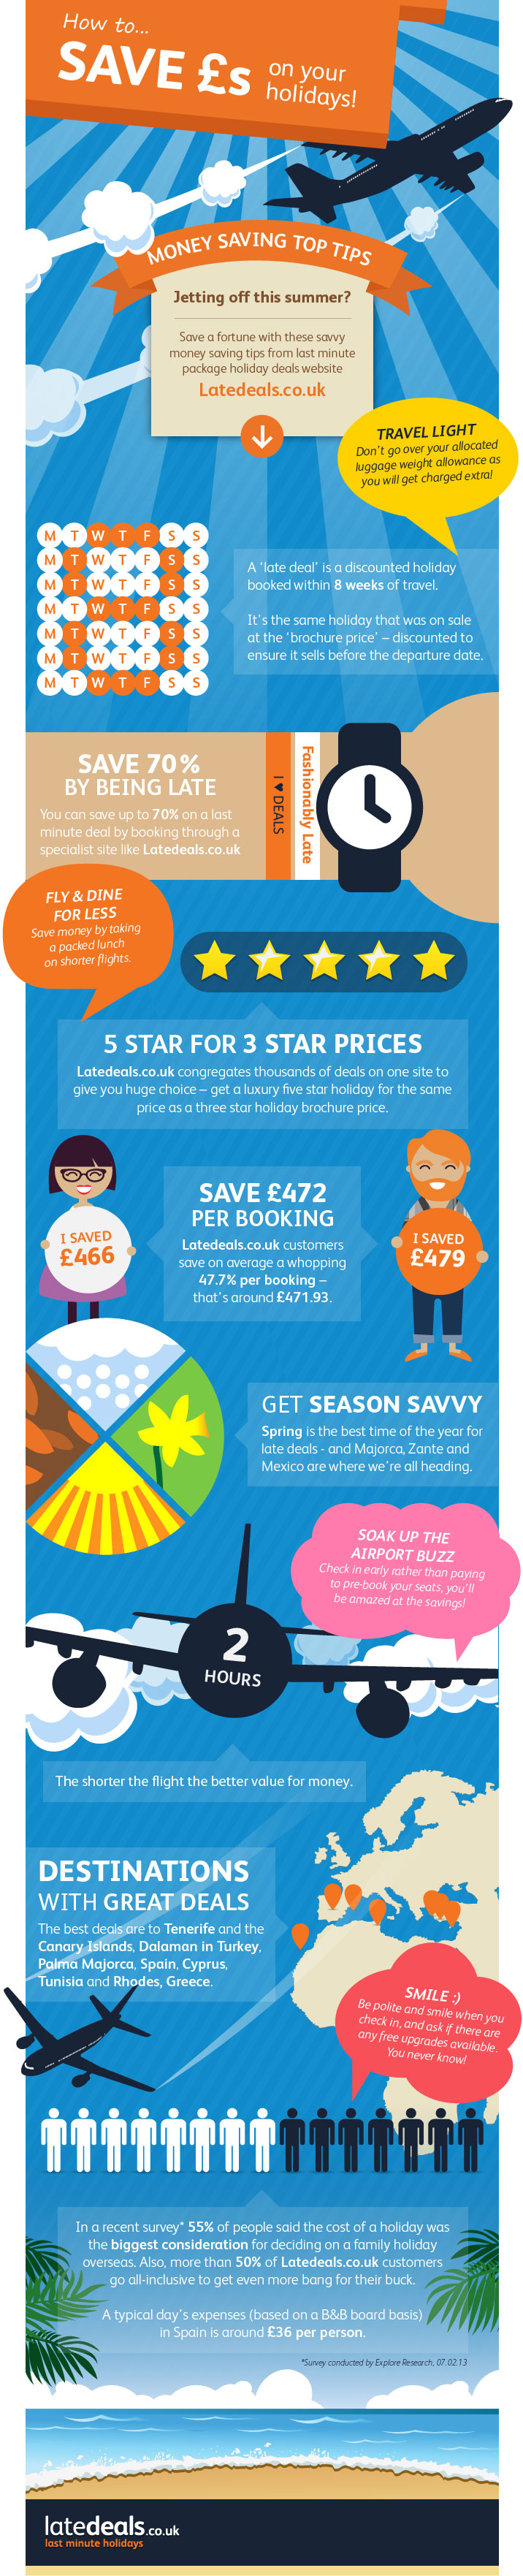 How to save £s on your holidays